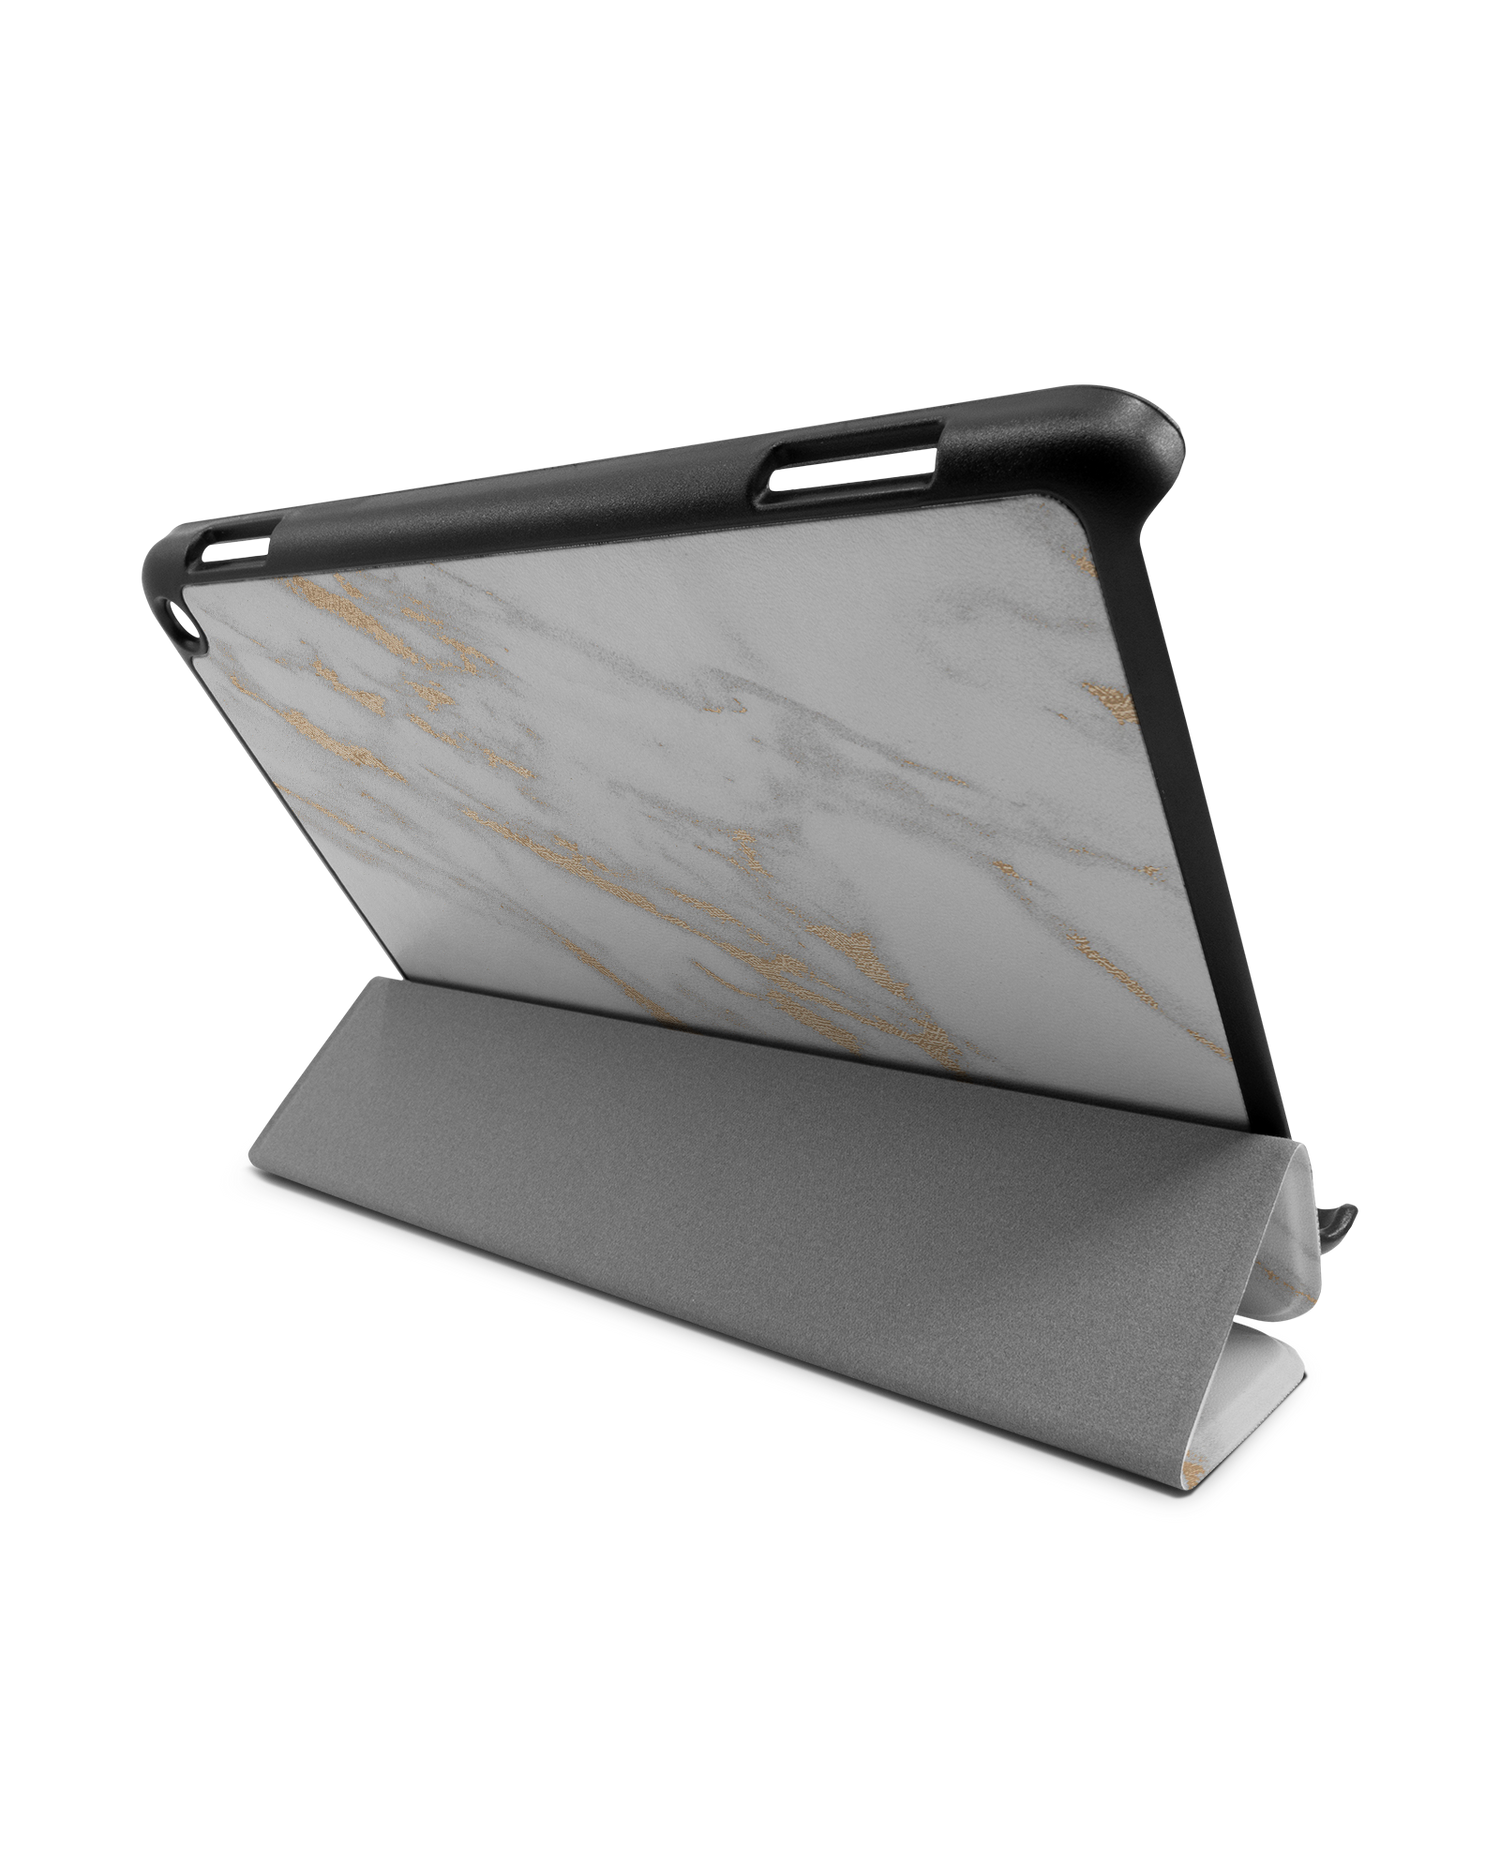 Gold Marble Elegance Tablet Smart Case for Amazon Fire HD 8 (2022), Amazon Fire HD 8 Plus (2022), Amazon Fire HD 8 (2020), Amazon Fire HD 8 Plus (2020): Used as Stand